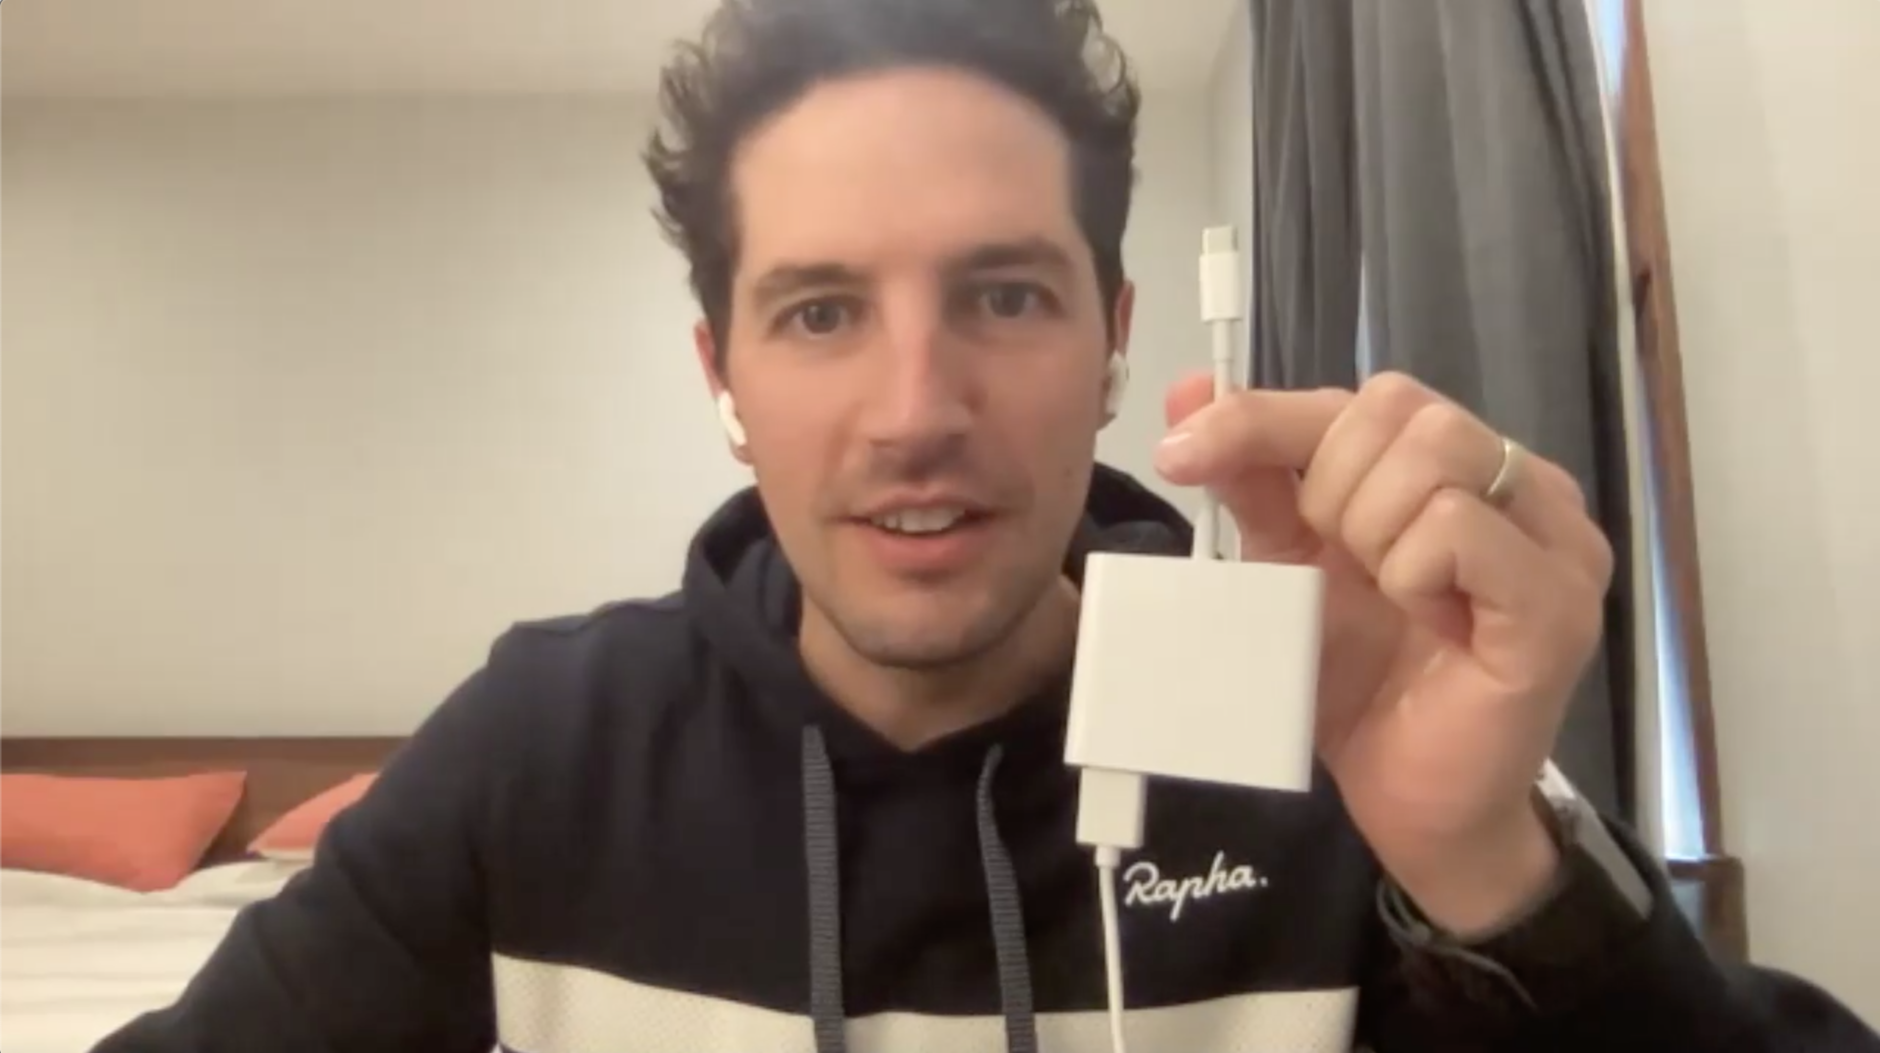 A white man with brown hair is wearing a hoodie and is holding up a large, clunky, Macbook USB-C dongle with a USB cord plugged into the back. He looks amused, but also kind of annoyed.